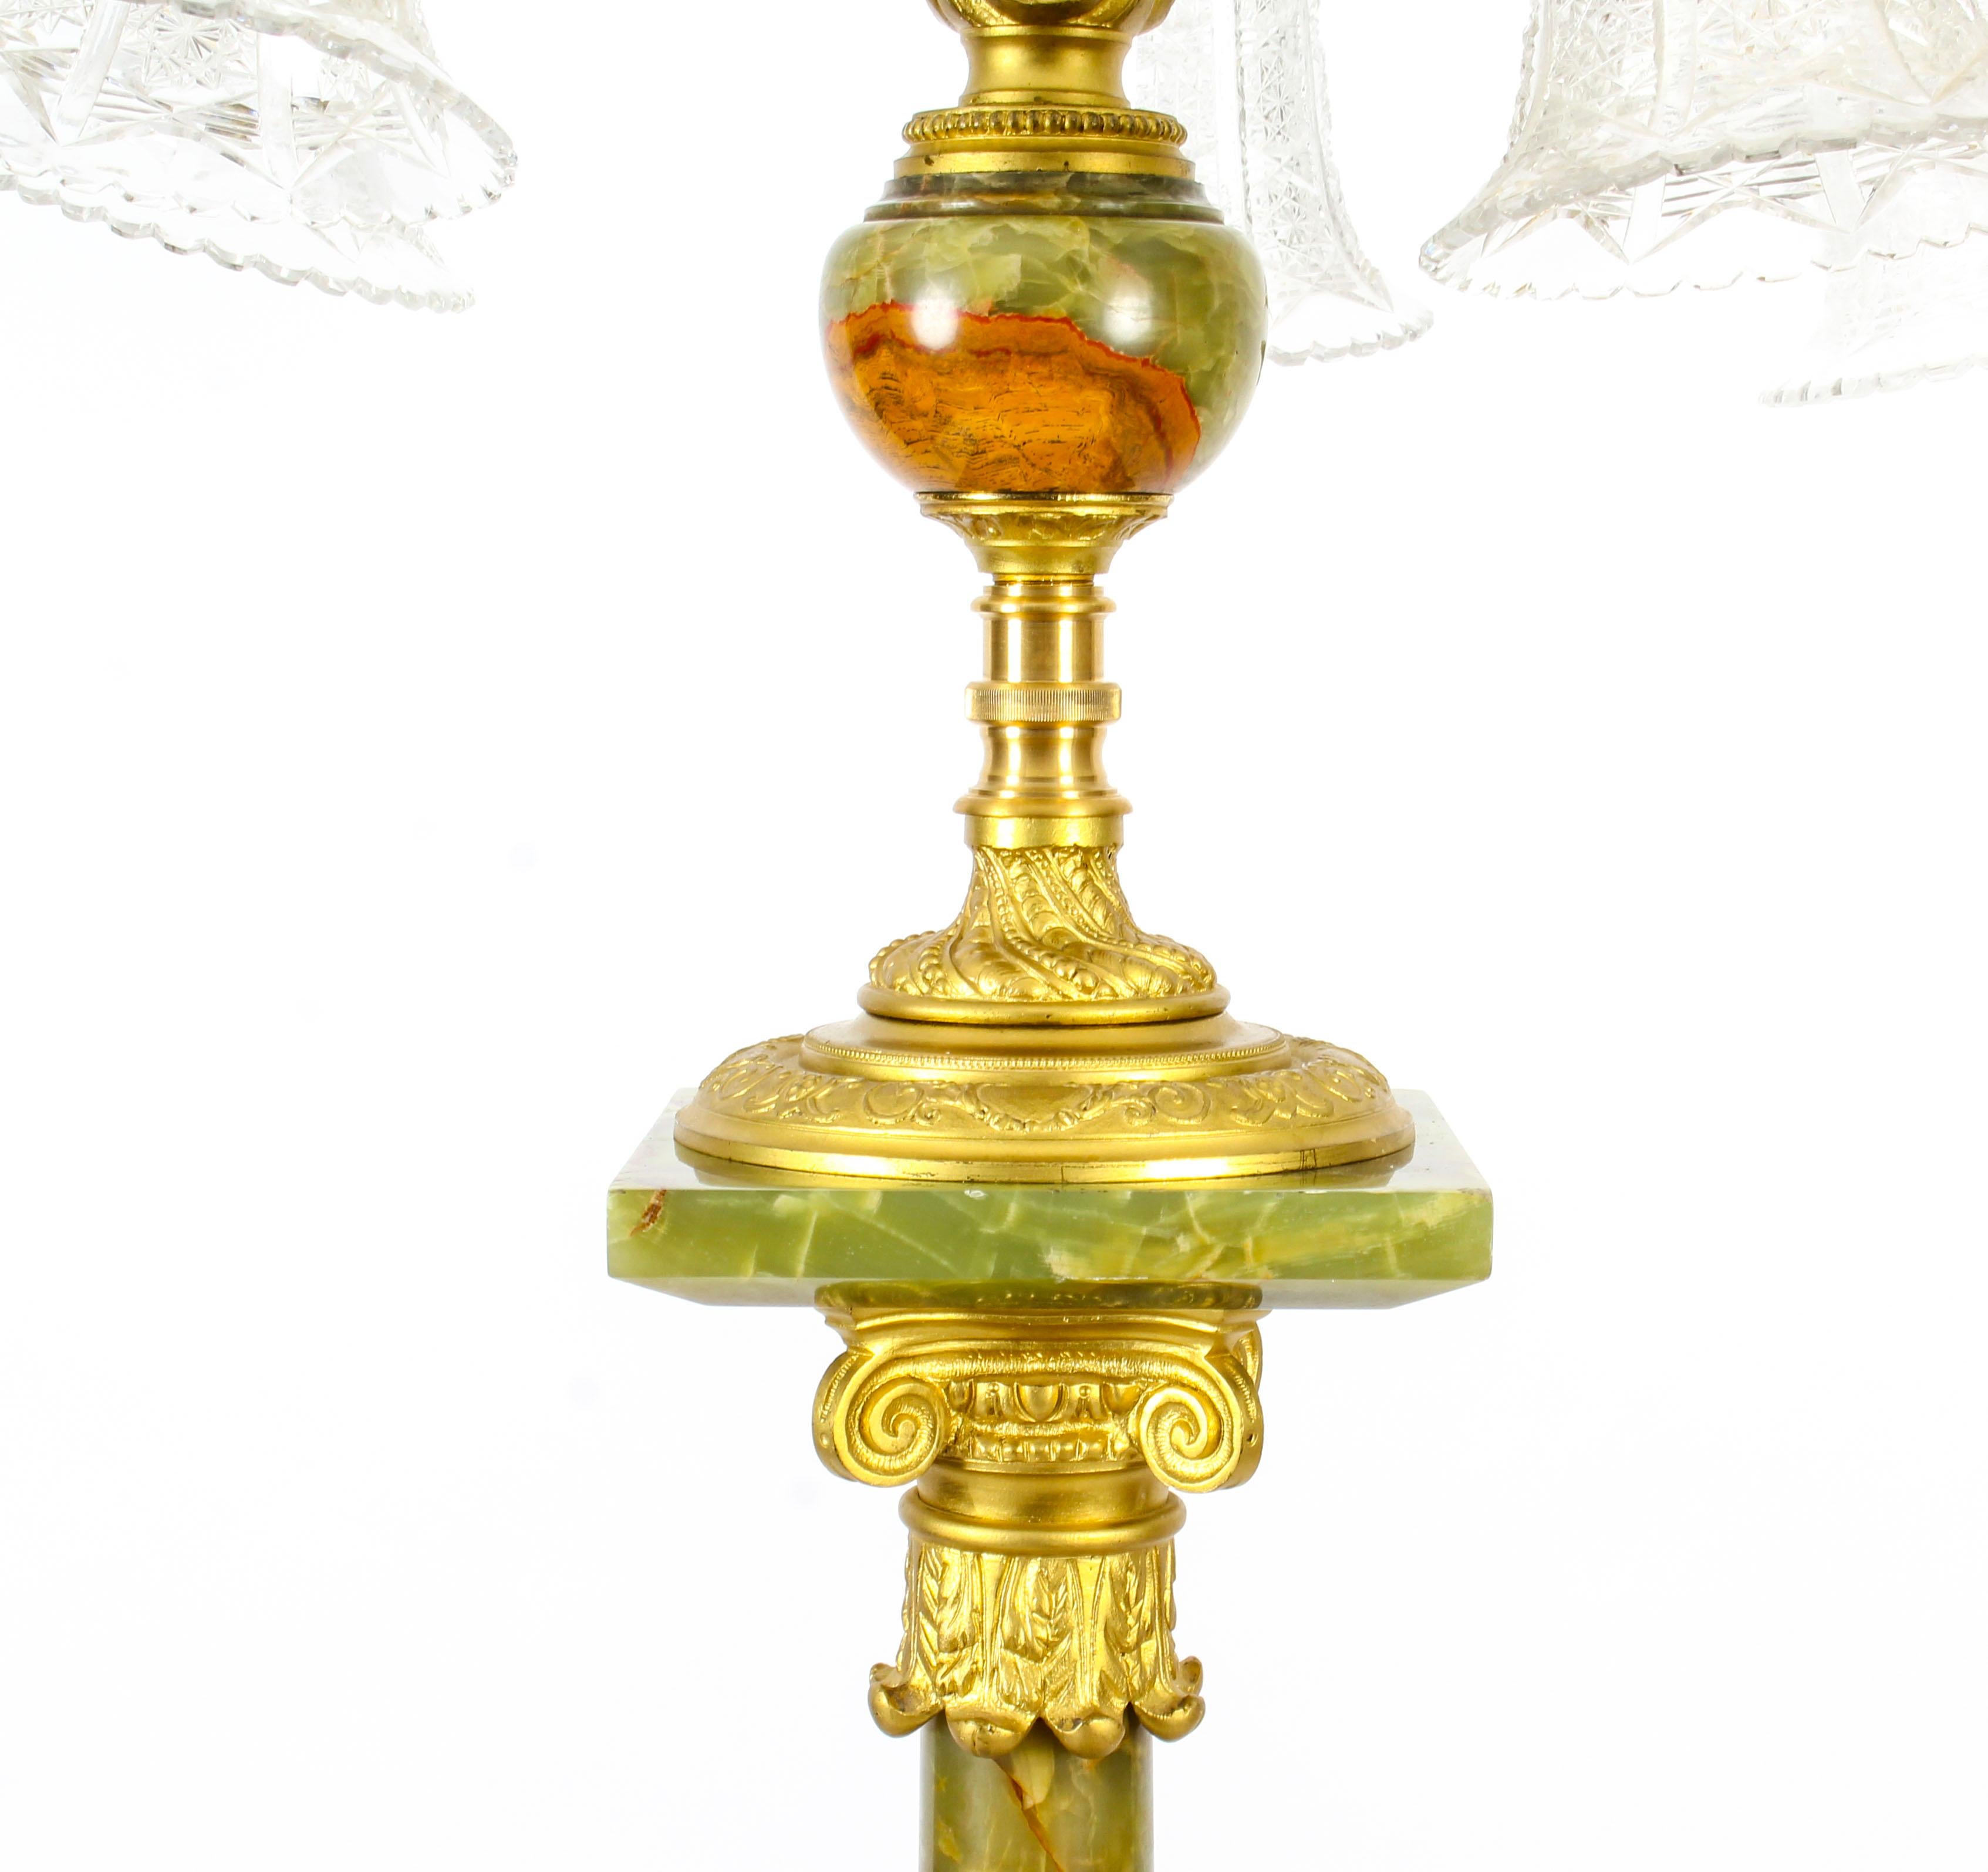 Antique Onyx and Ormolu Floor Standard Lamp Louis Revival, Early 20th Century 4